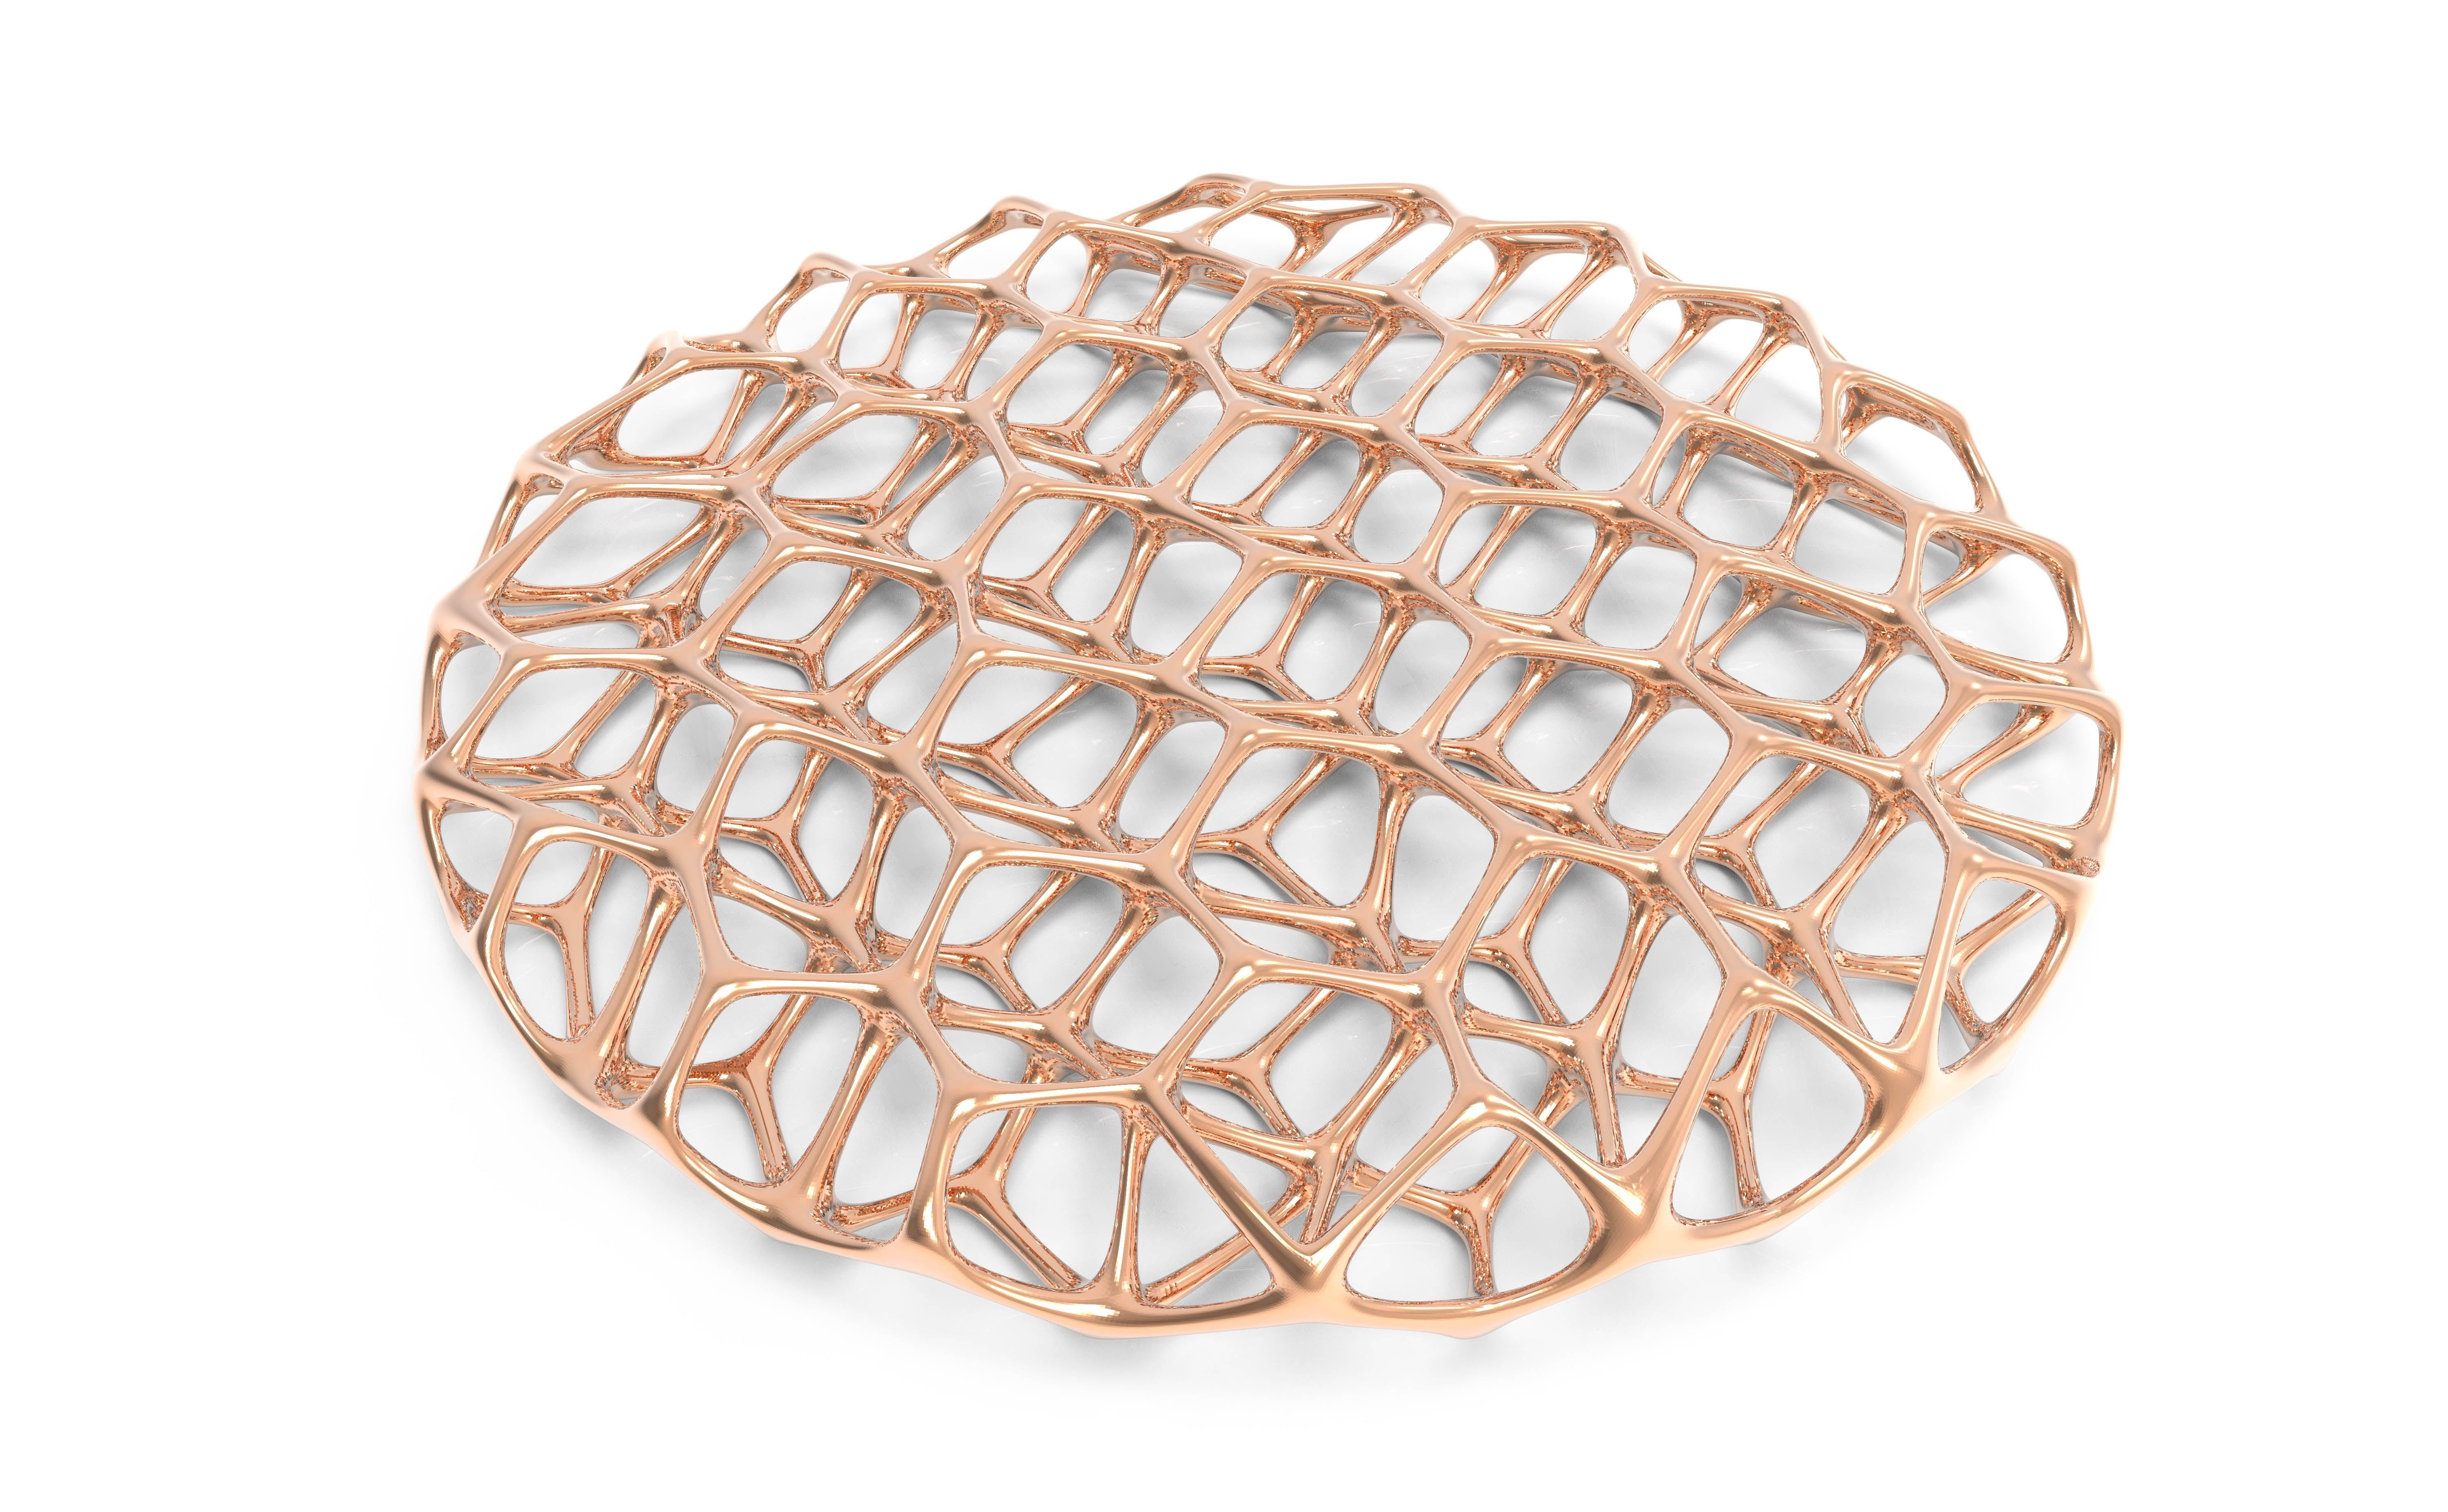 A signature Kyttanen design that has been integrated into the permanent collection at MoMA. This piece measures 50cm in diameter, and is inspired by structures formed by soap bubbles. Available in luxurious glossy rose gold and silver-plated